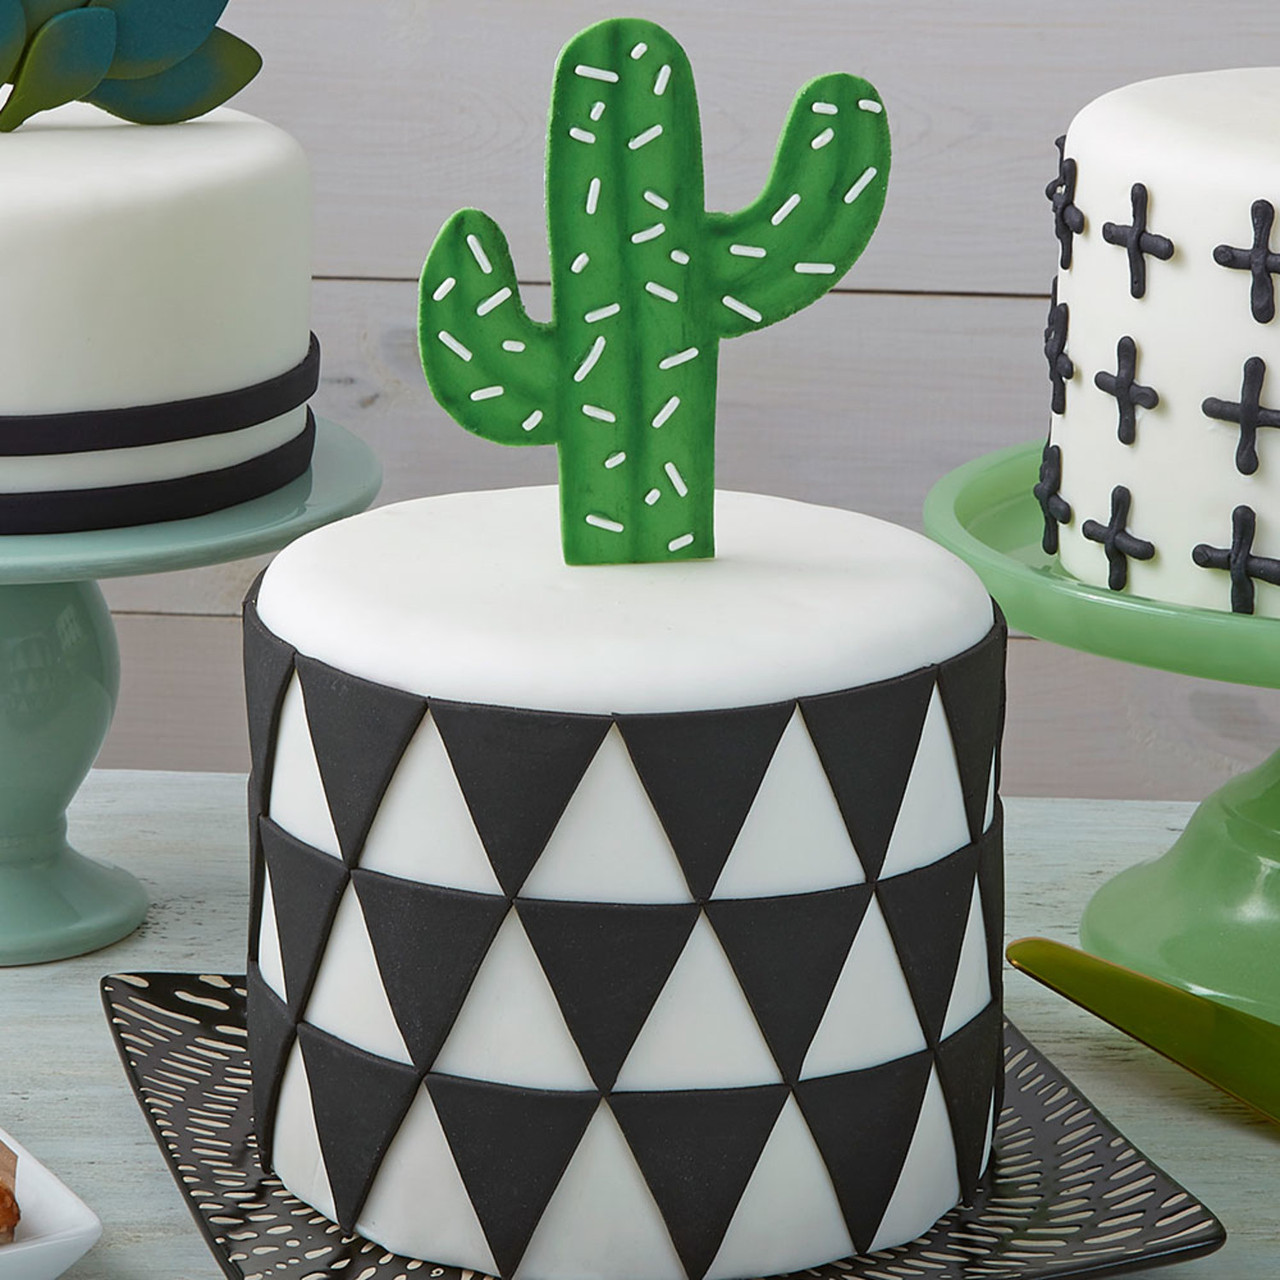 how-to-decorate-a-cactus-cake